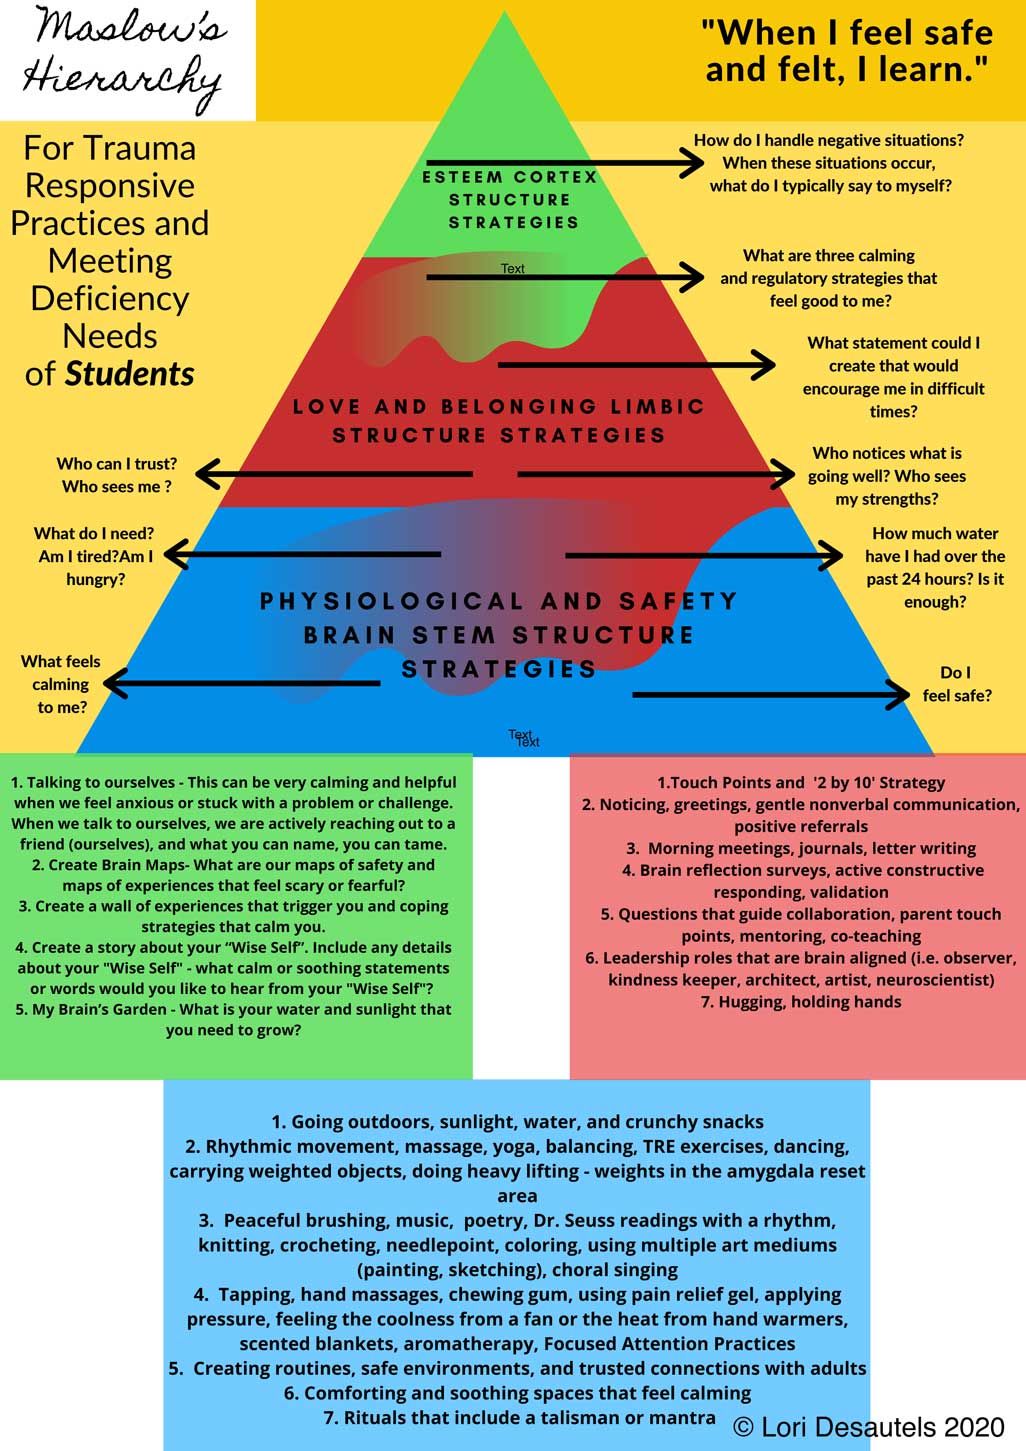 Maslow's Hierarchy For Trauma Responsive Practices and Meeting Deficiency Needs of Students